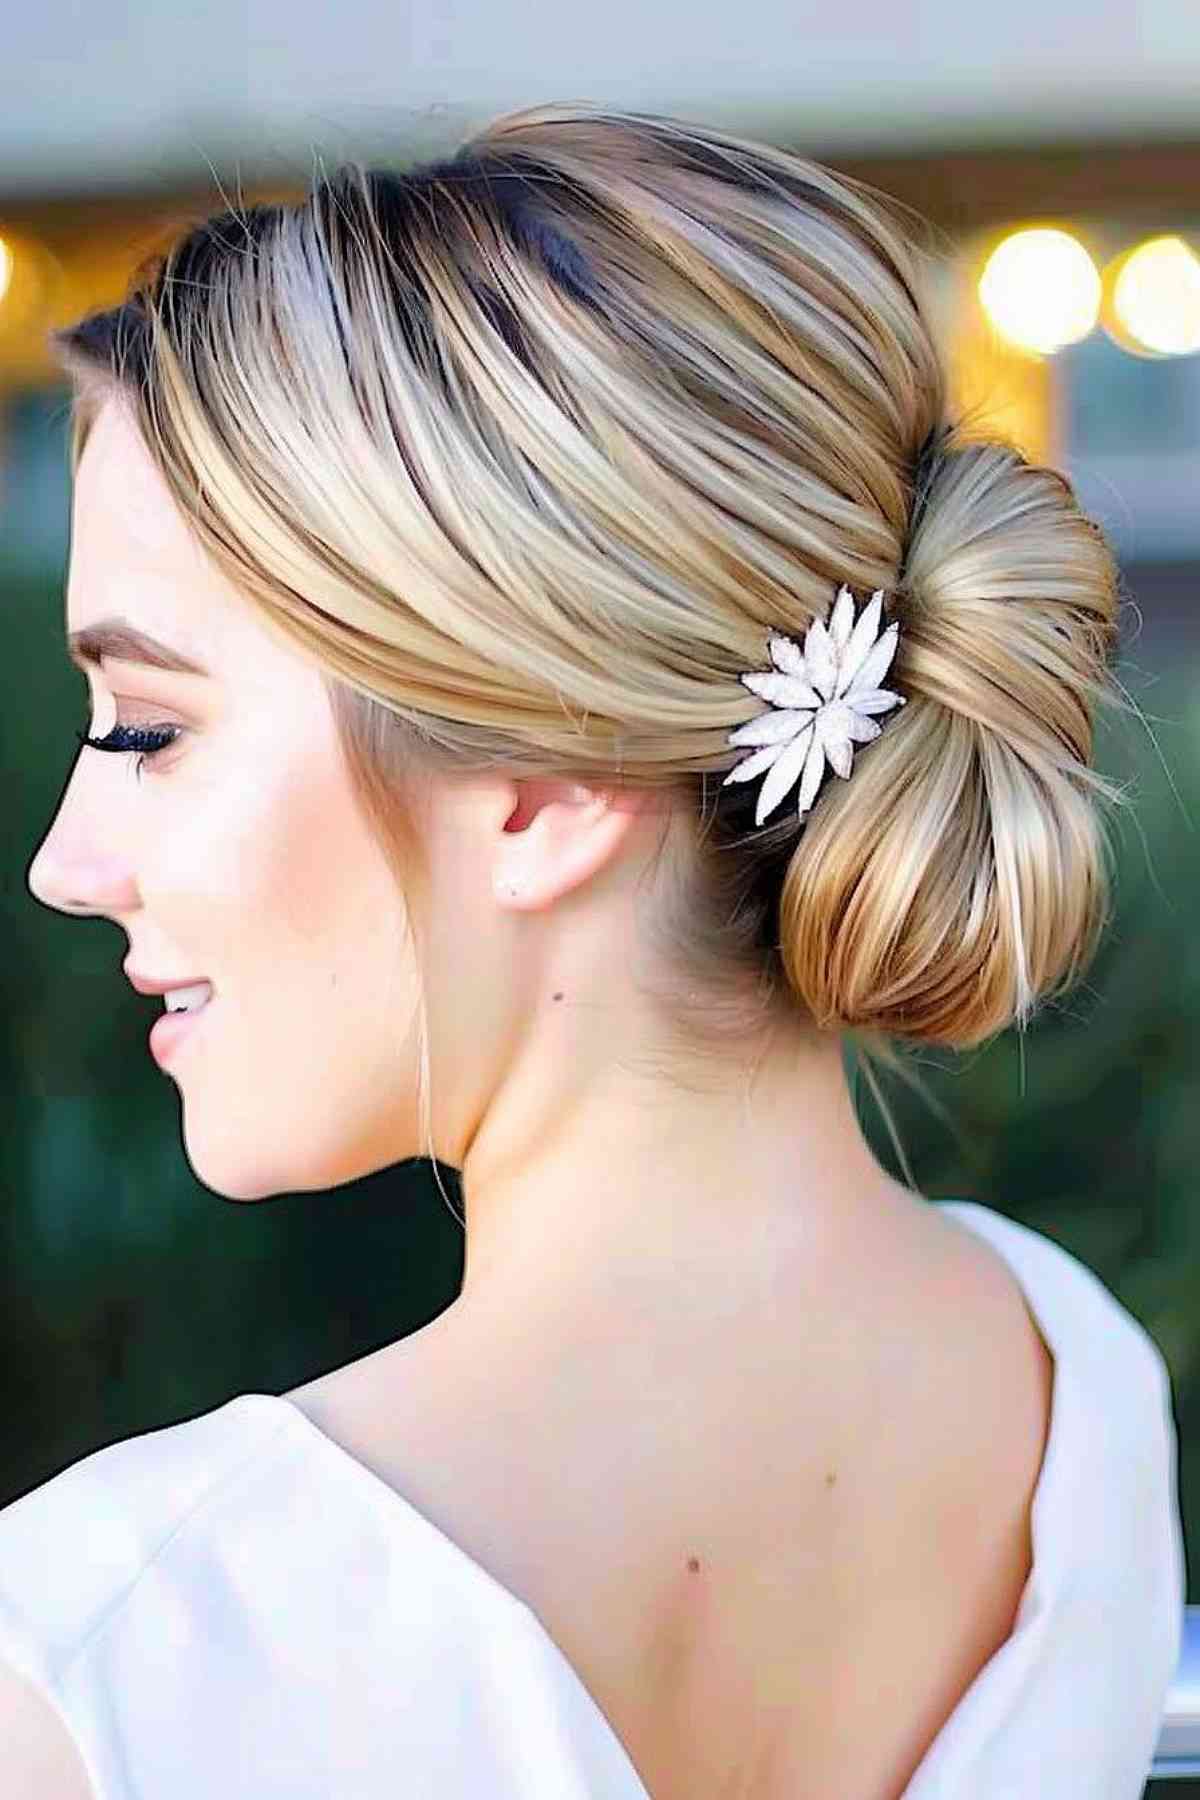 Polished low bun with a floral hair accessory for gala elegance.